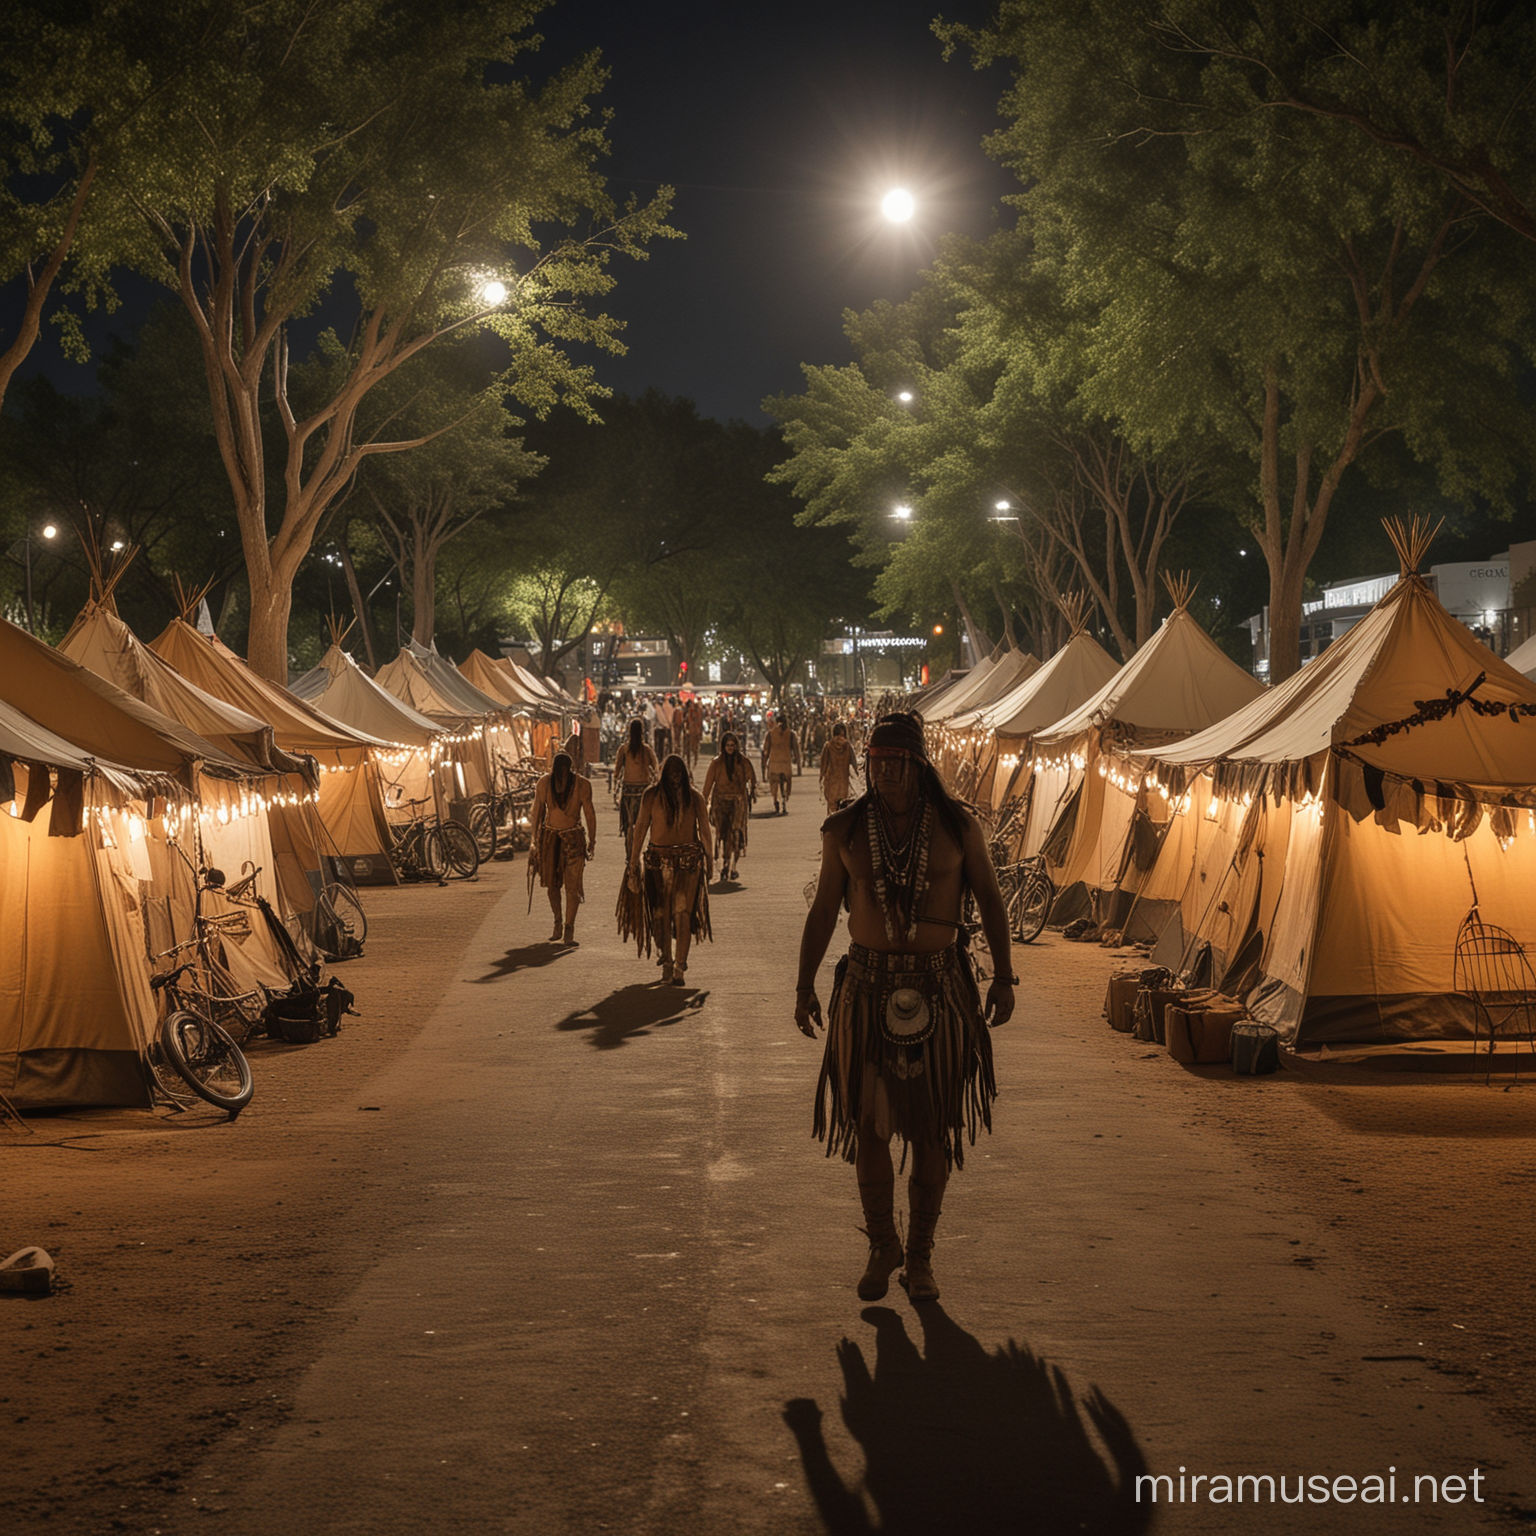 Native American Warrior wearing a garment.The image shows a group of people walking around a plaza with tents and trees. It is an outdoor scene with a street and some bicycles visible. The setting appears to be a town or city at night with lights illuminating the area.